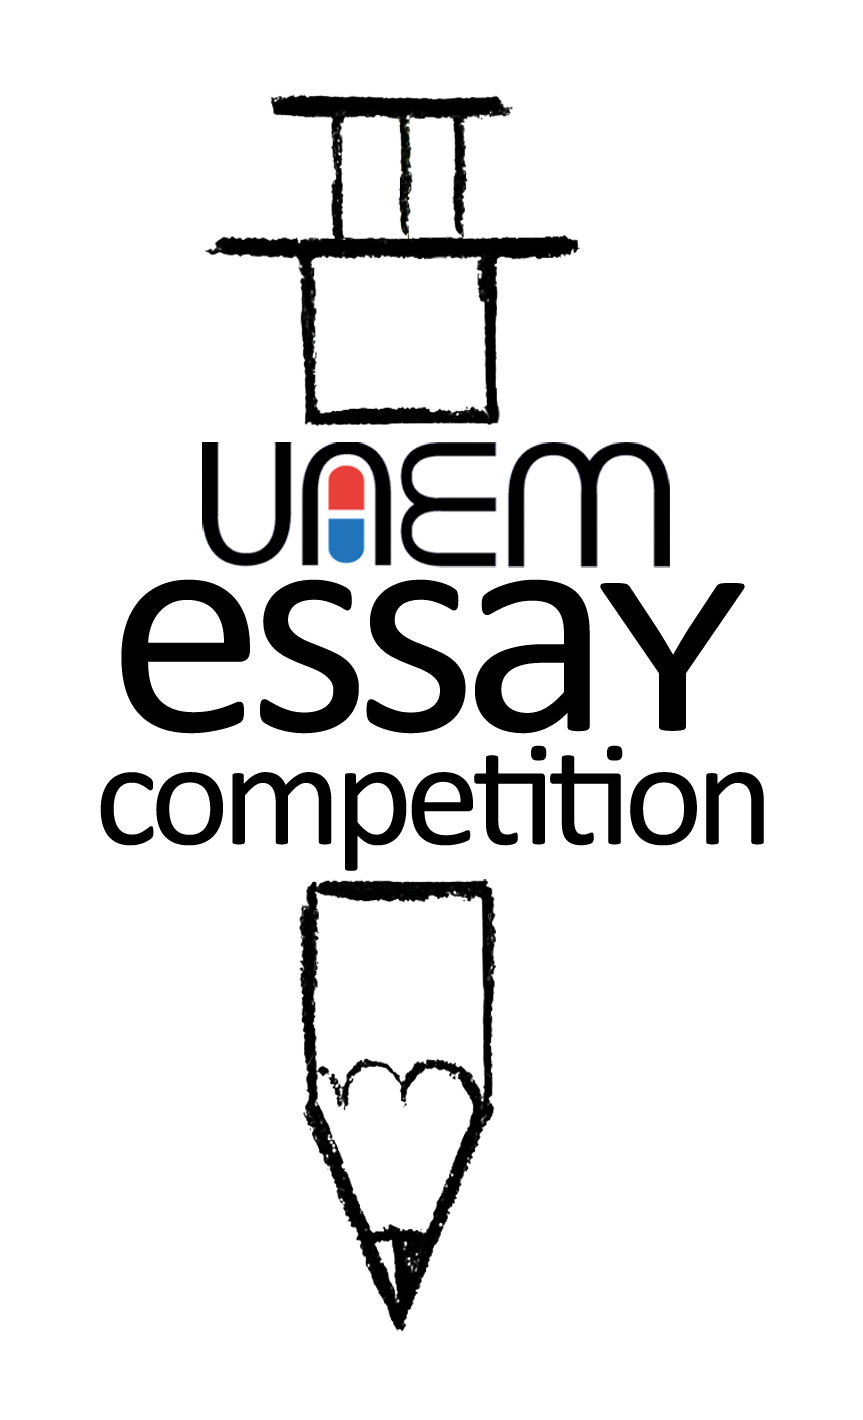 Cipe youth essay competition 2012